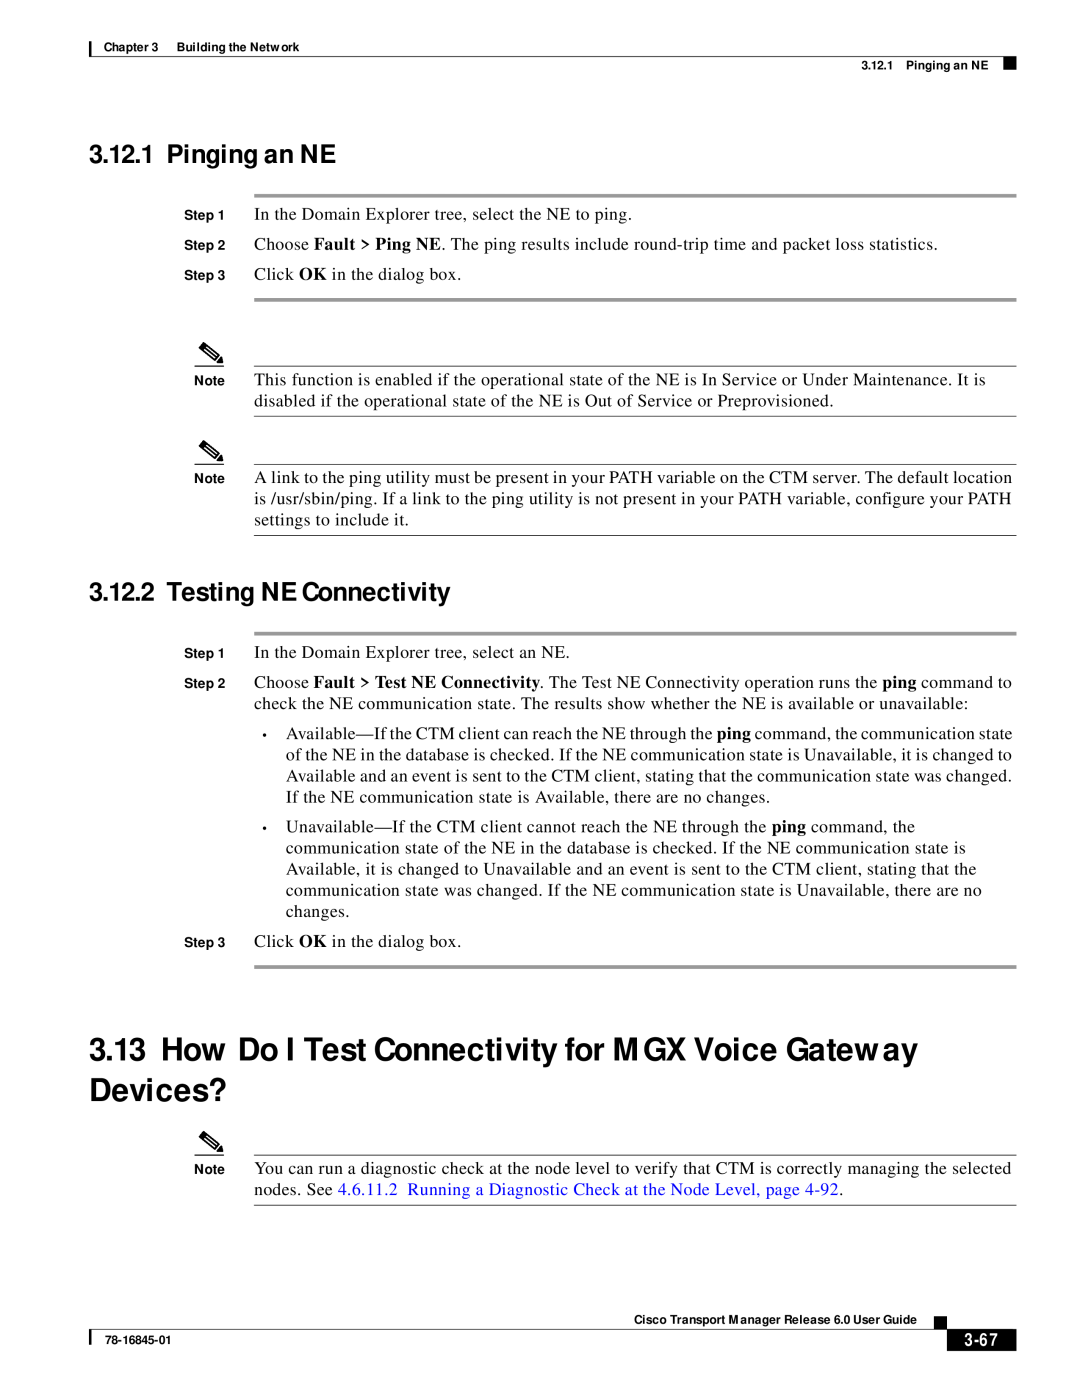 Cisco Systems 78-16845-01 manual How Do I Test Connectivity for MGX Voice Gateway Devices?, Pinging an NE, 3-67 